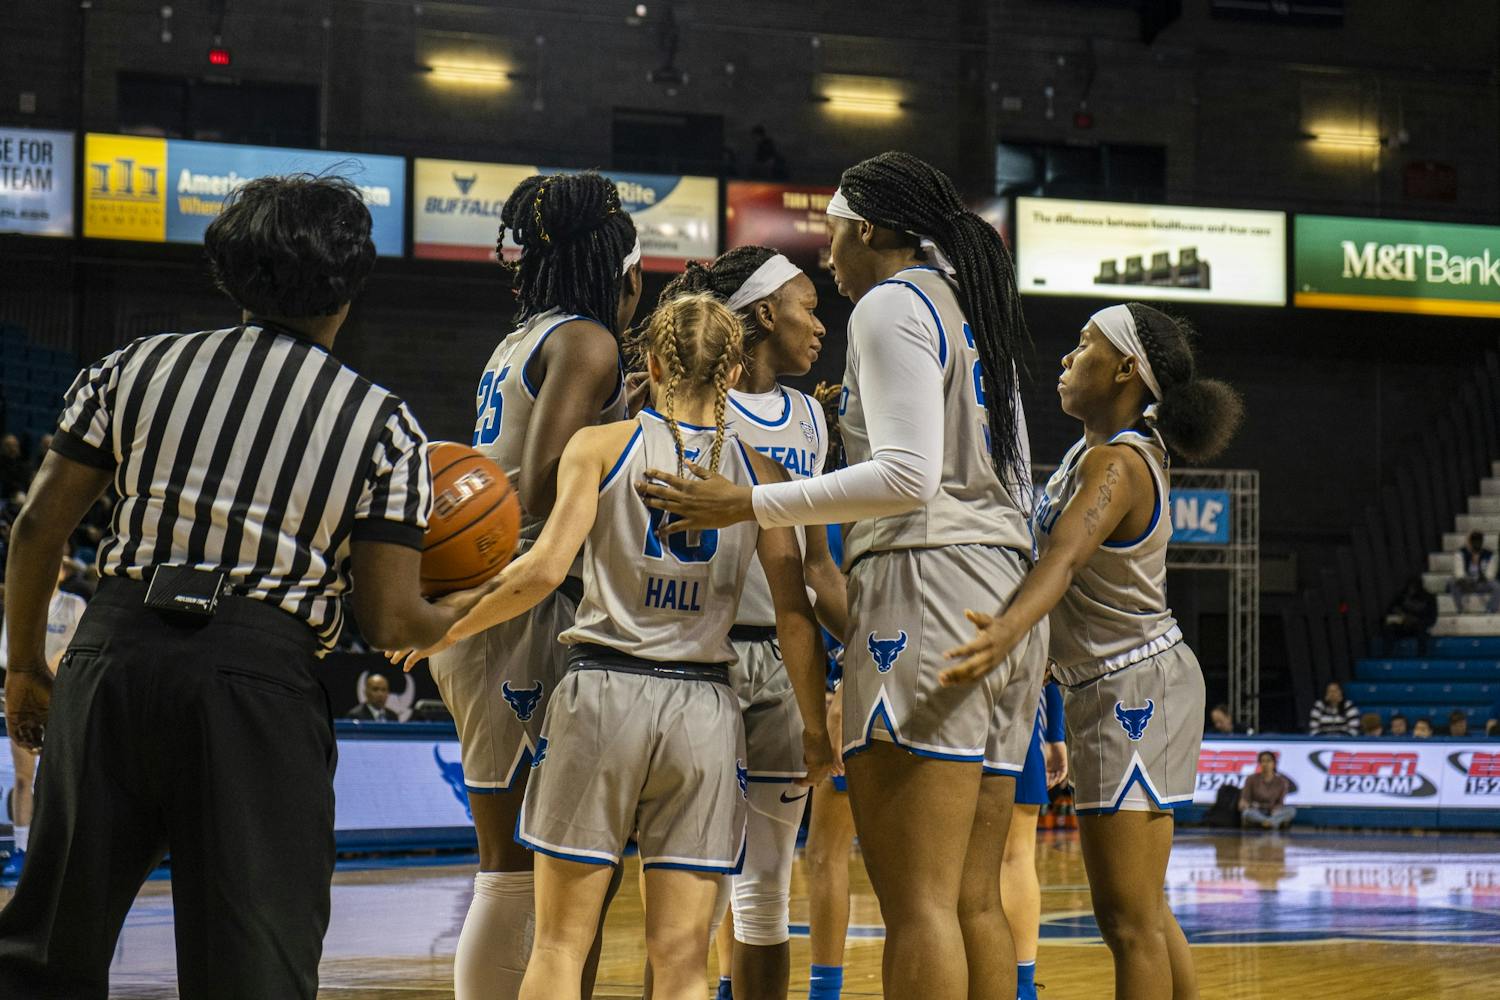 The women’s basketball team huddles up before an offensive possession.